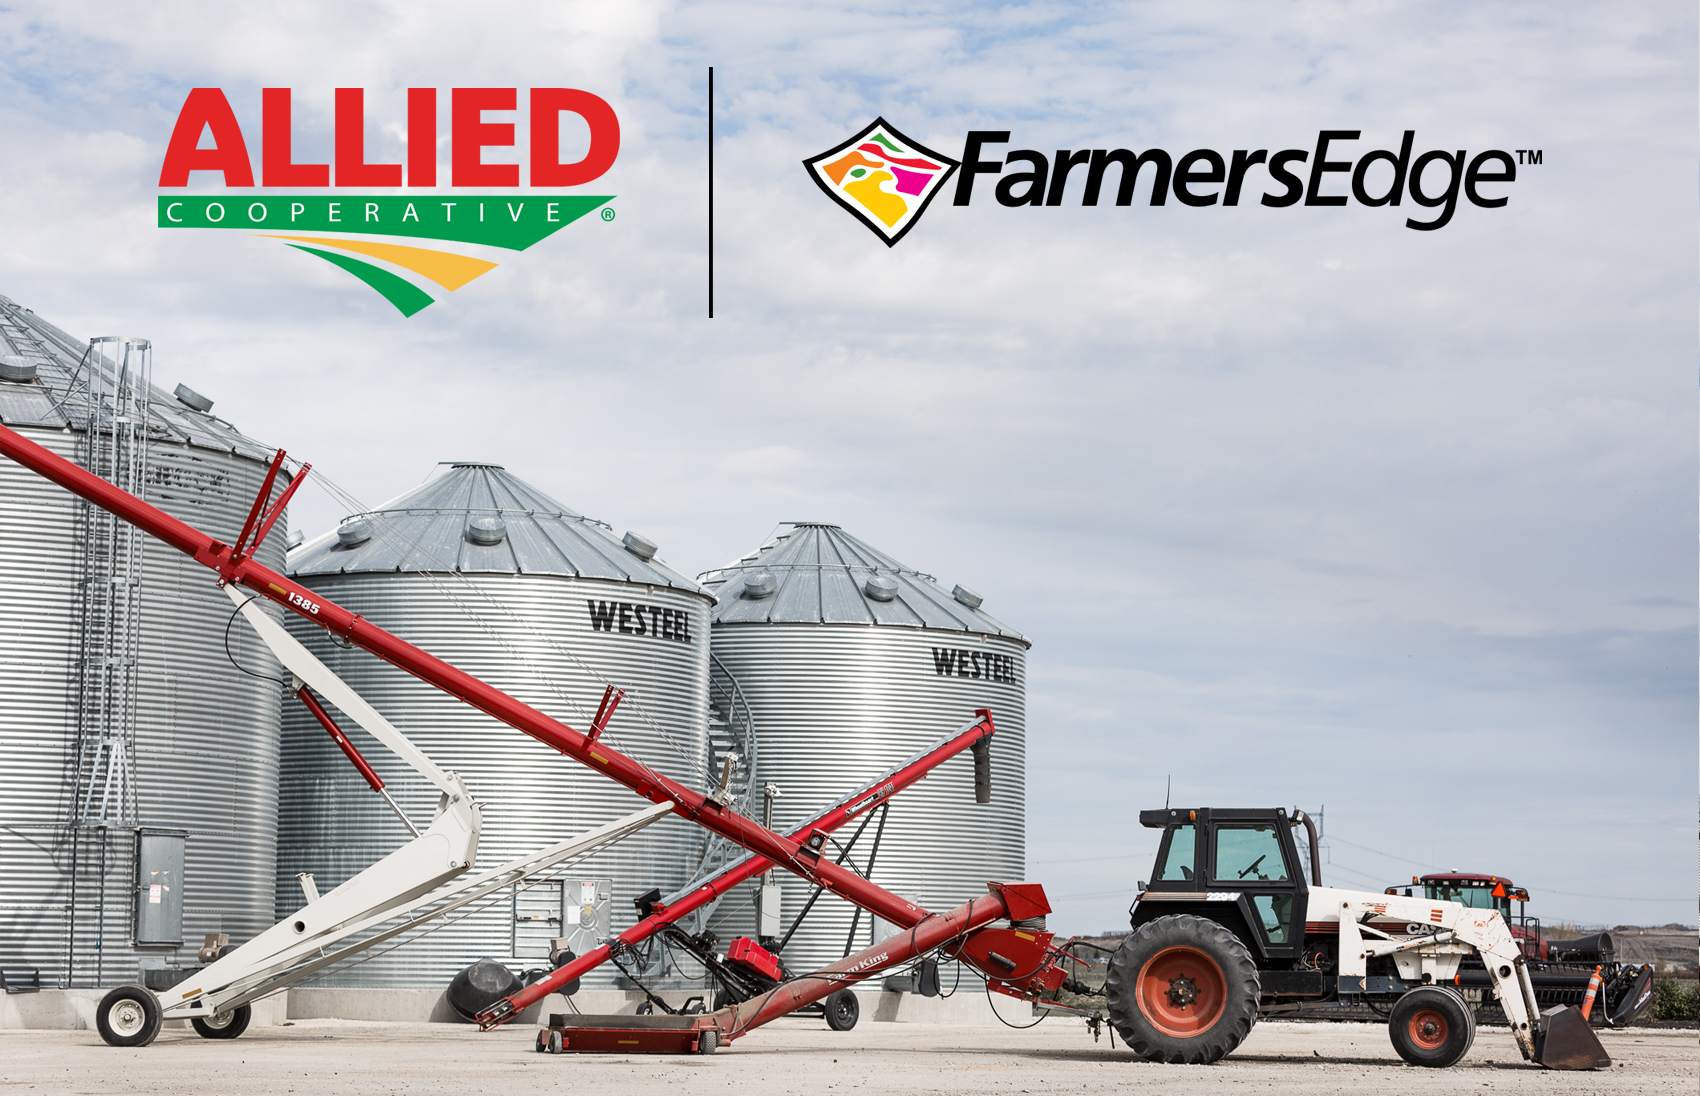 Farmers Edge Partners with Allied Cooperative to Accelerate Wisconsin’s Transition to Data-Driven Decision Agriculture